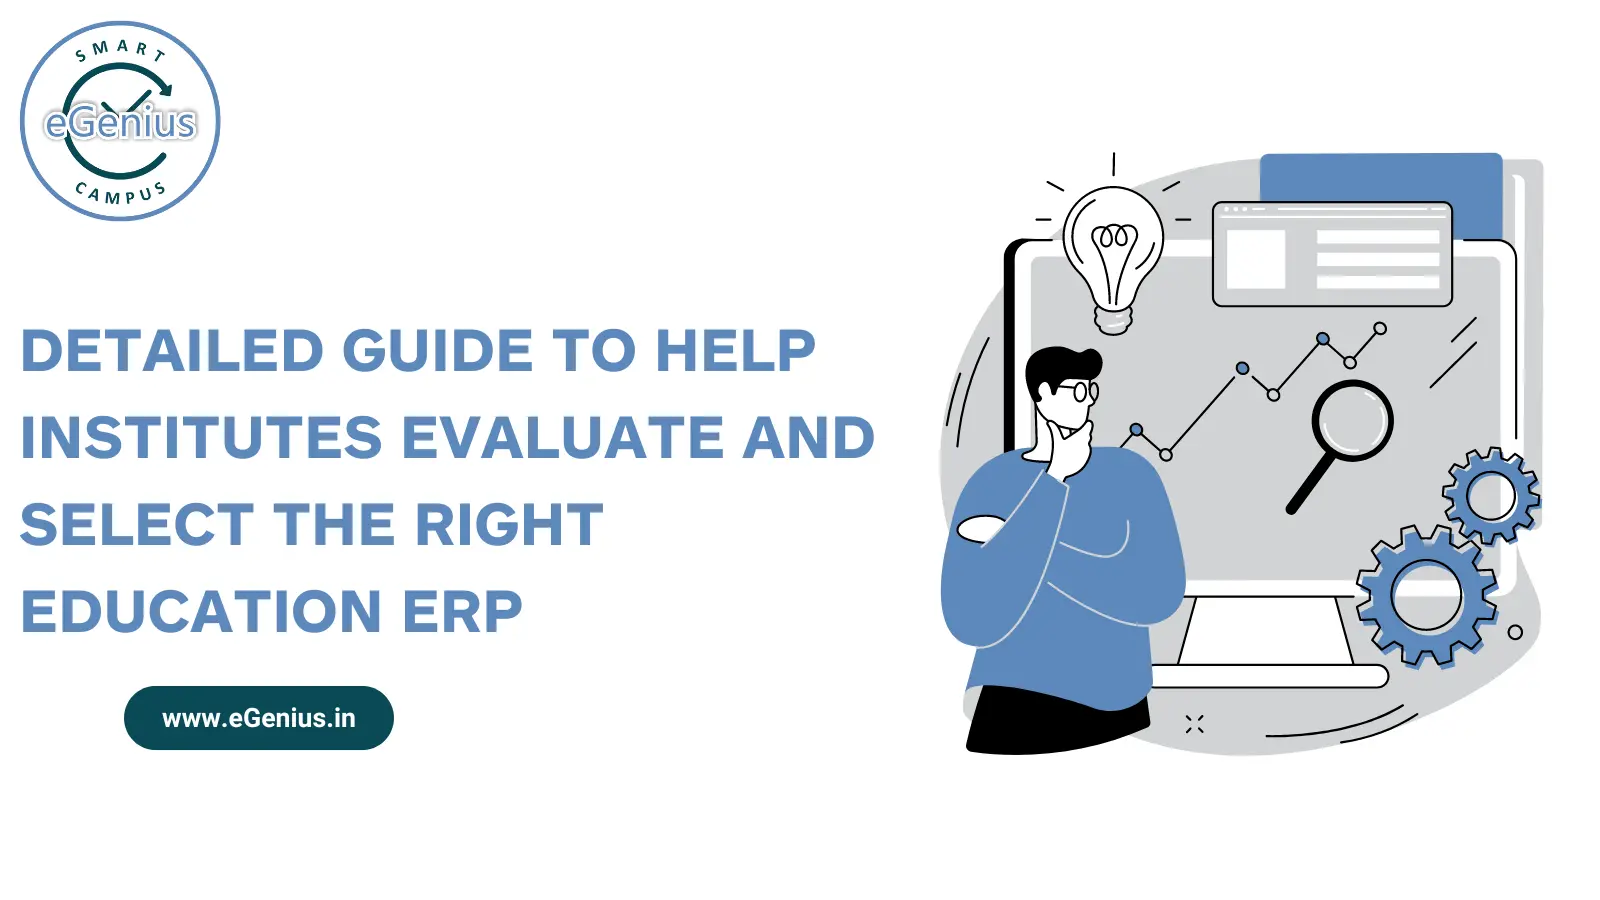 Detailed guide to help institutes evaluate and select the right Education ERP.